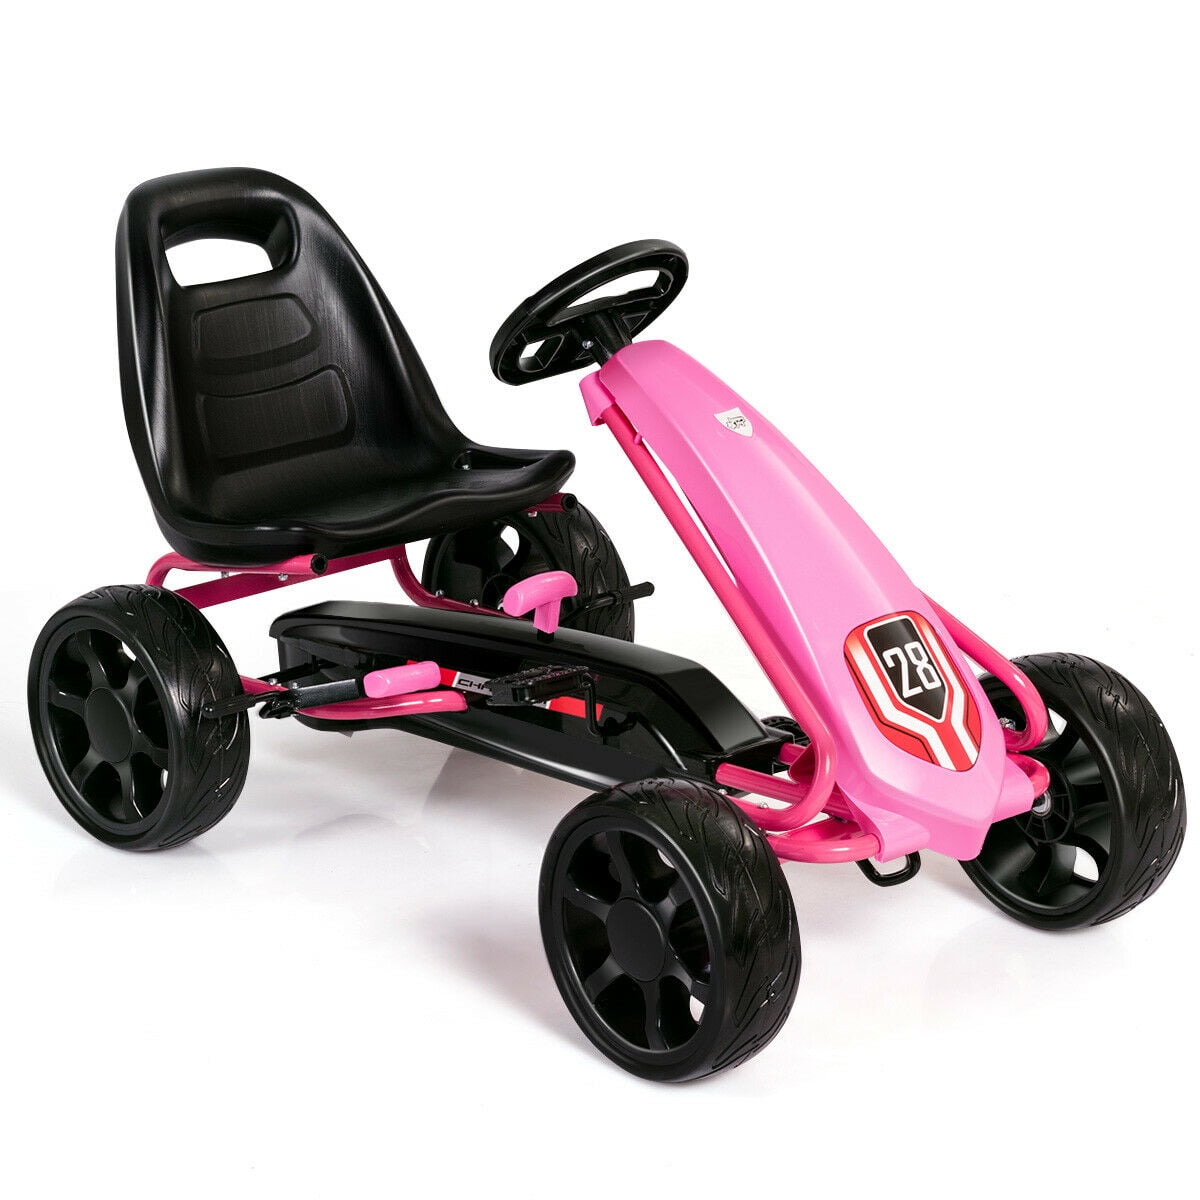 Kids Ride On Toys Pedal Powered Go Kart Pedal Car 